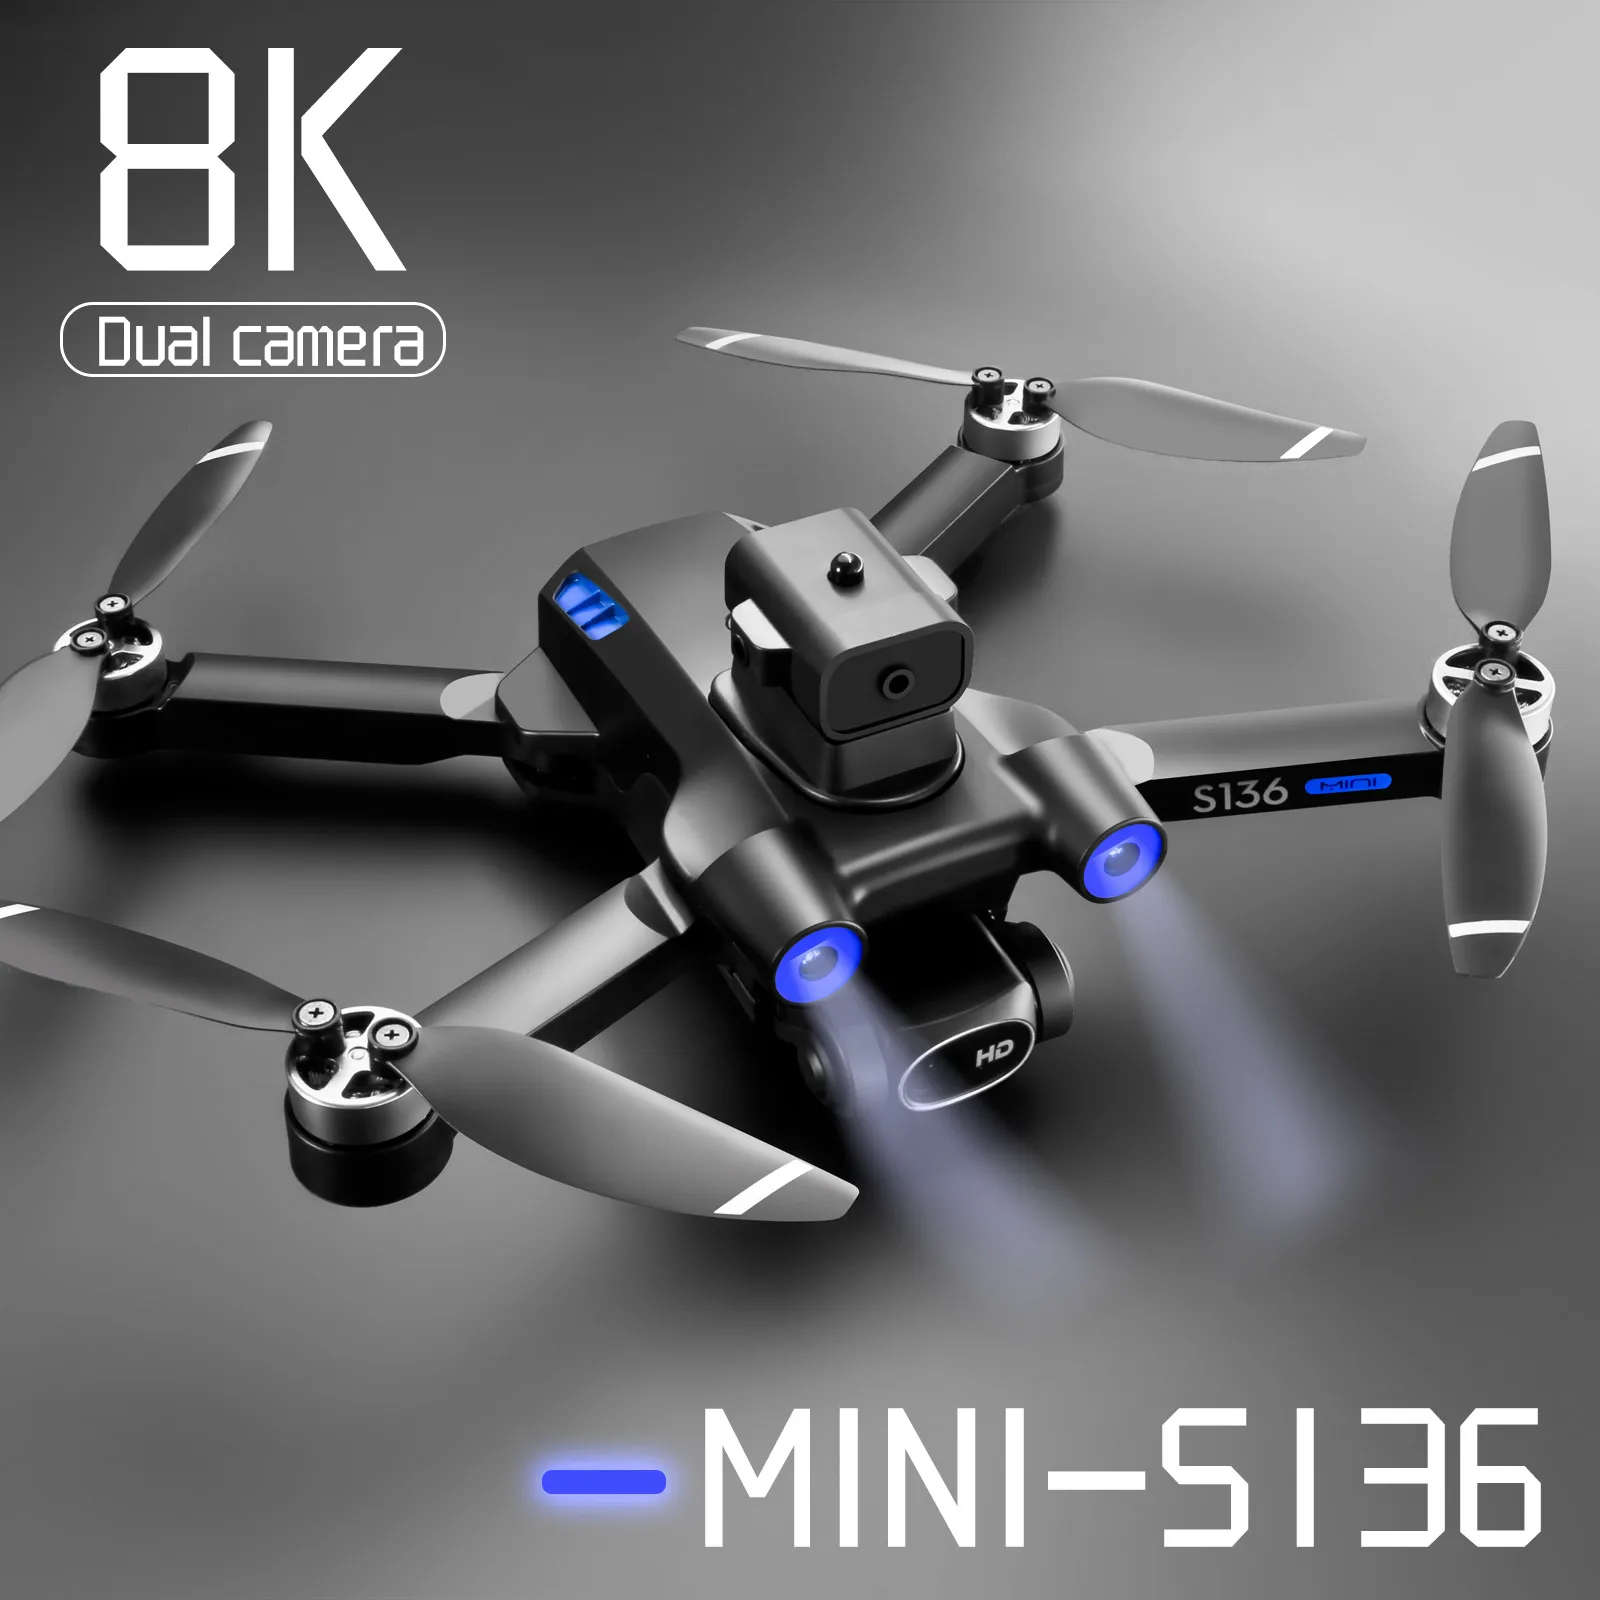 

S136 GPS Drone 4K Professional 8K Dual ESC Camera Optical Flow Positioning Obstacle Avoidance Brushless RC Foldable Quadcopter